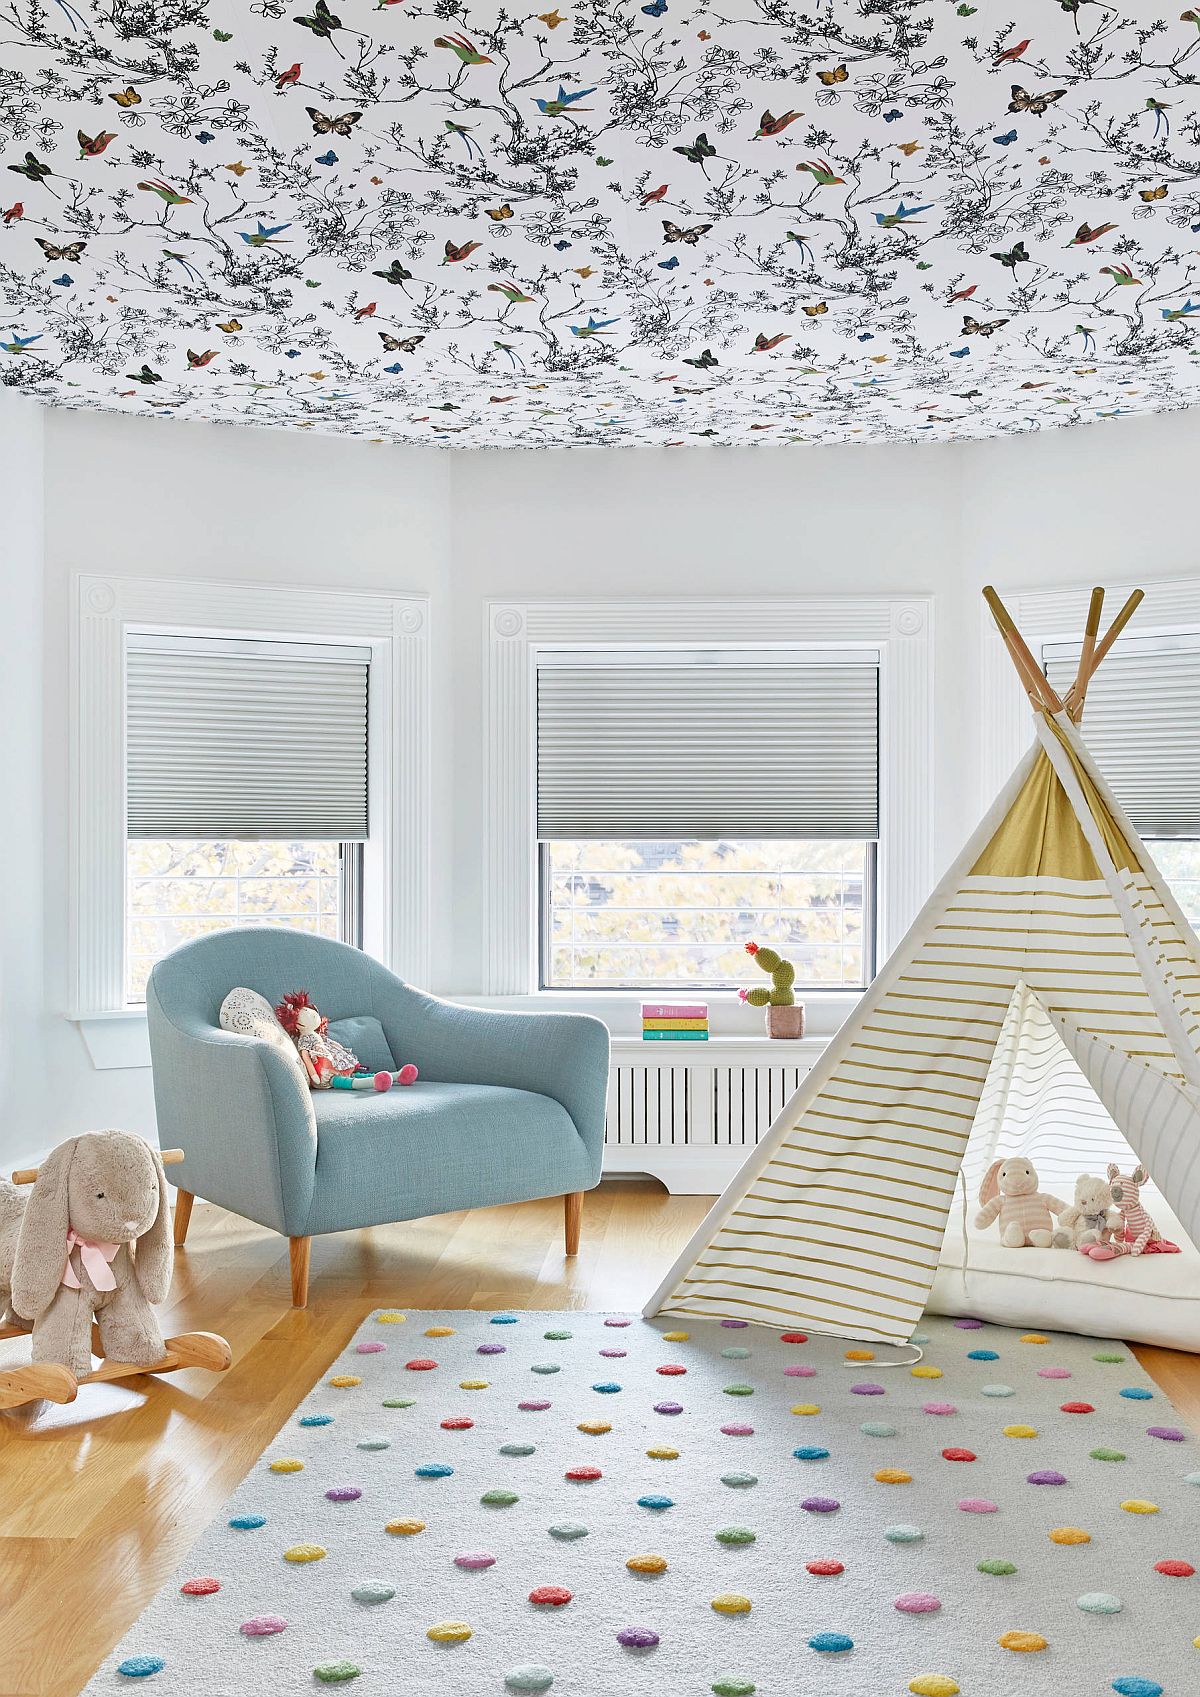 Vivacious-butterfly-and-birds-ceiling-wallpaper-fills-this-girls-room-with-fun-pattern-52559